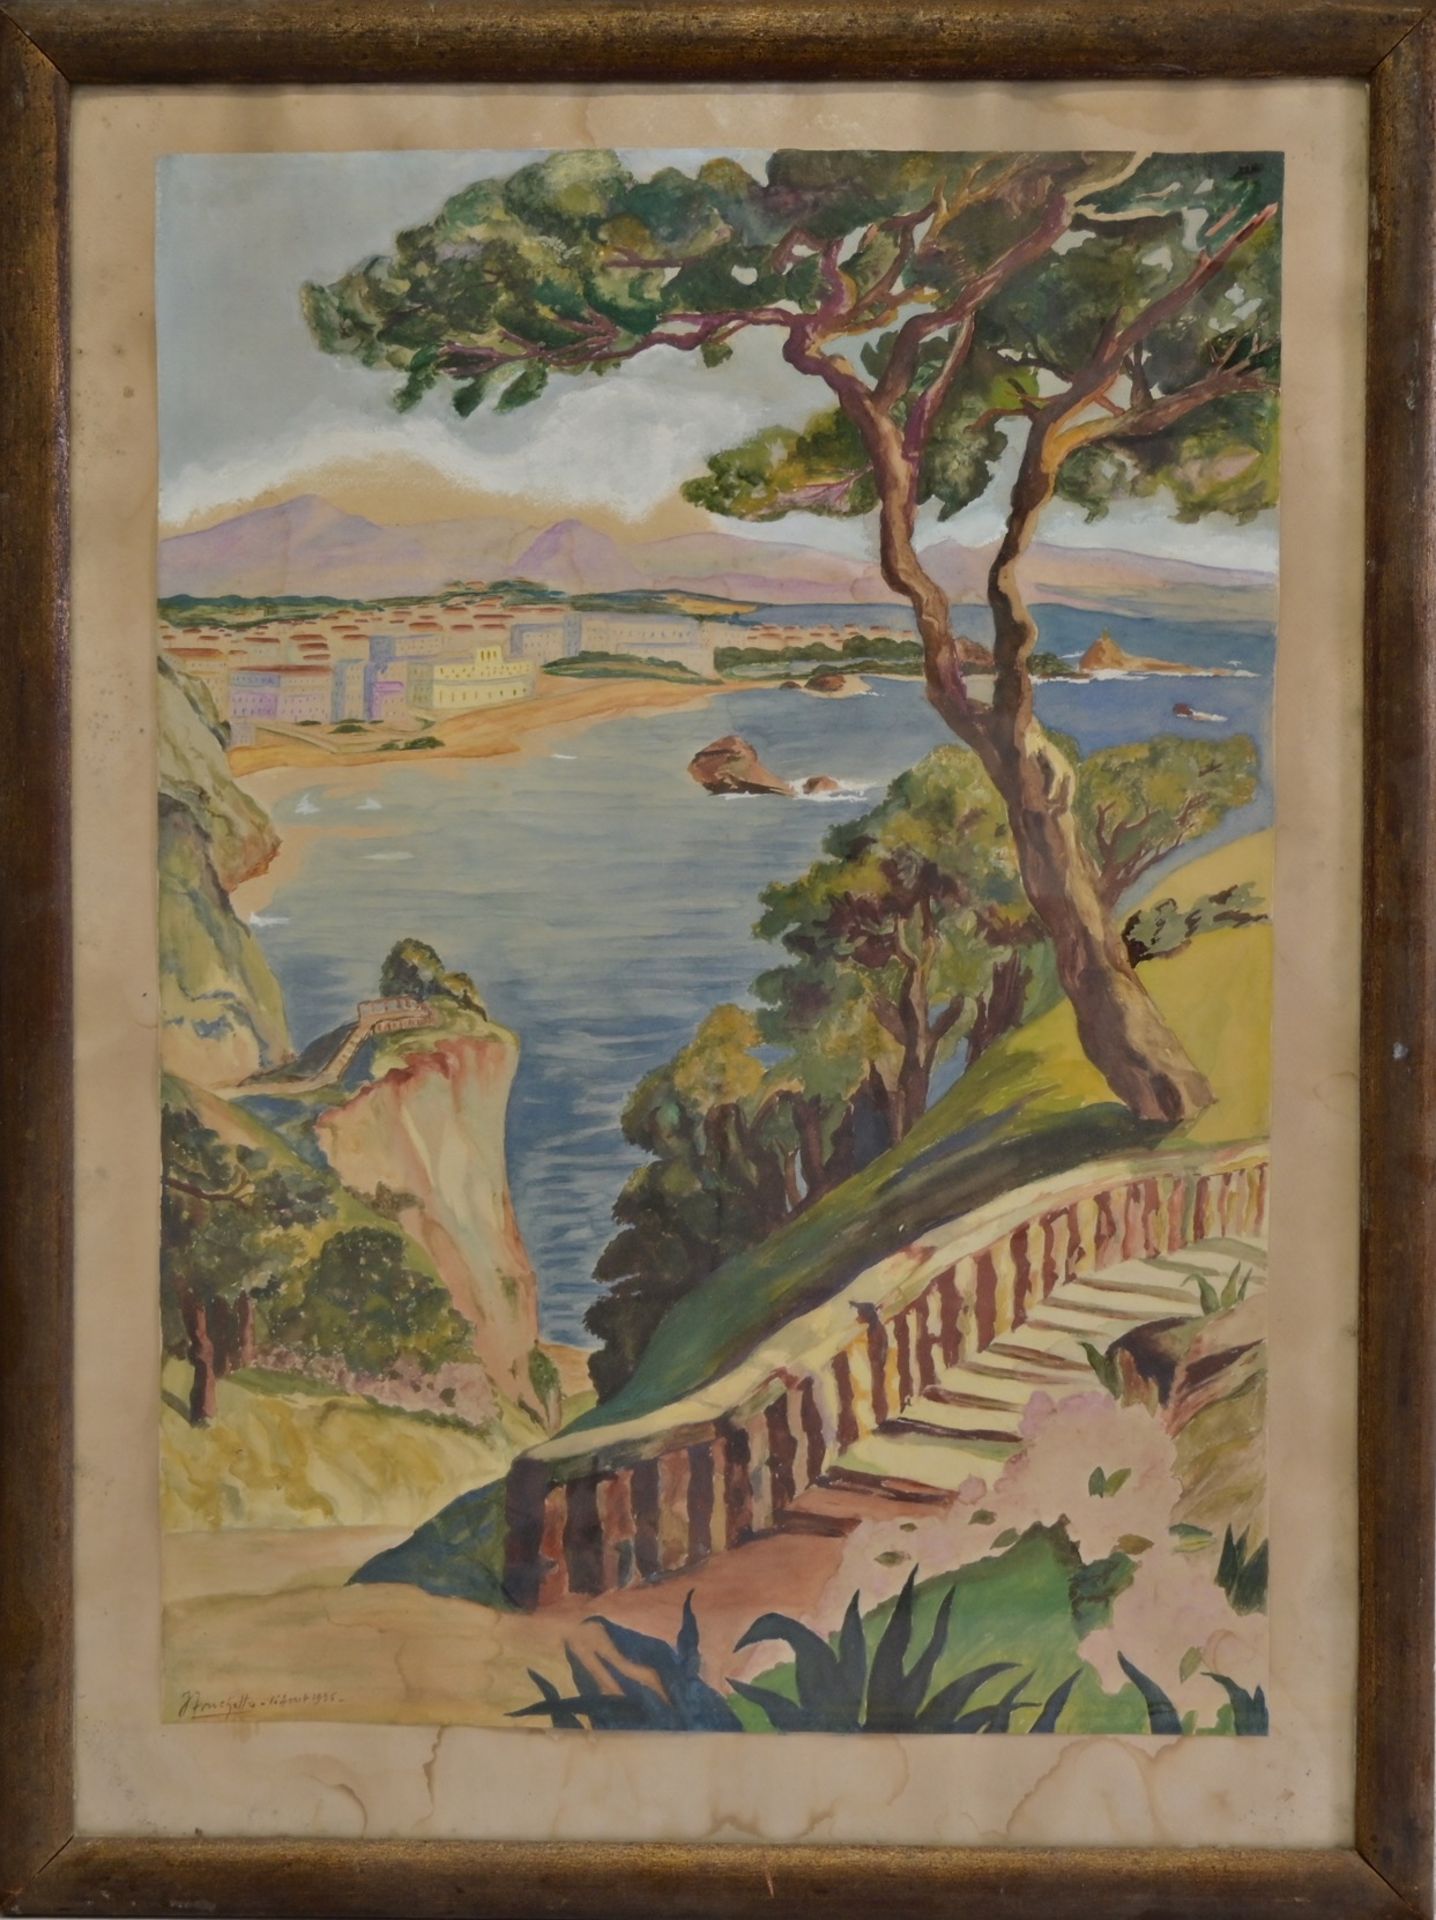 "French Riviera" 1936, watercolor on paper, signed by J Fruchetto, French Painting of the 20th C. - Bild 2 aus 5